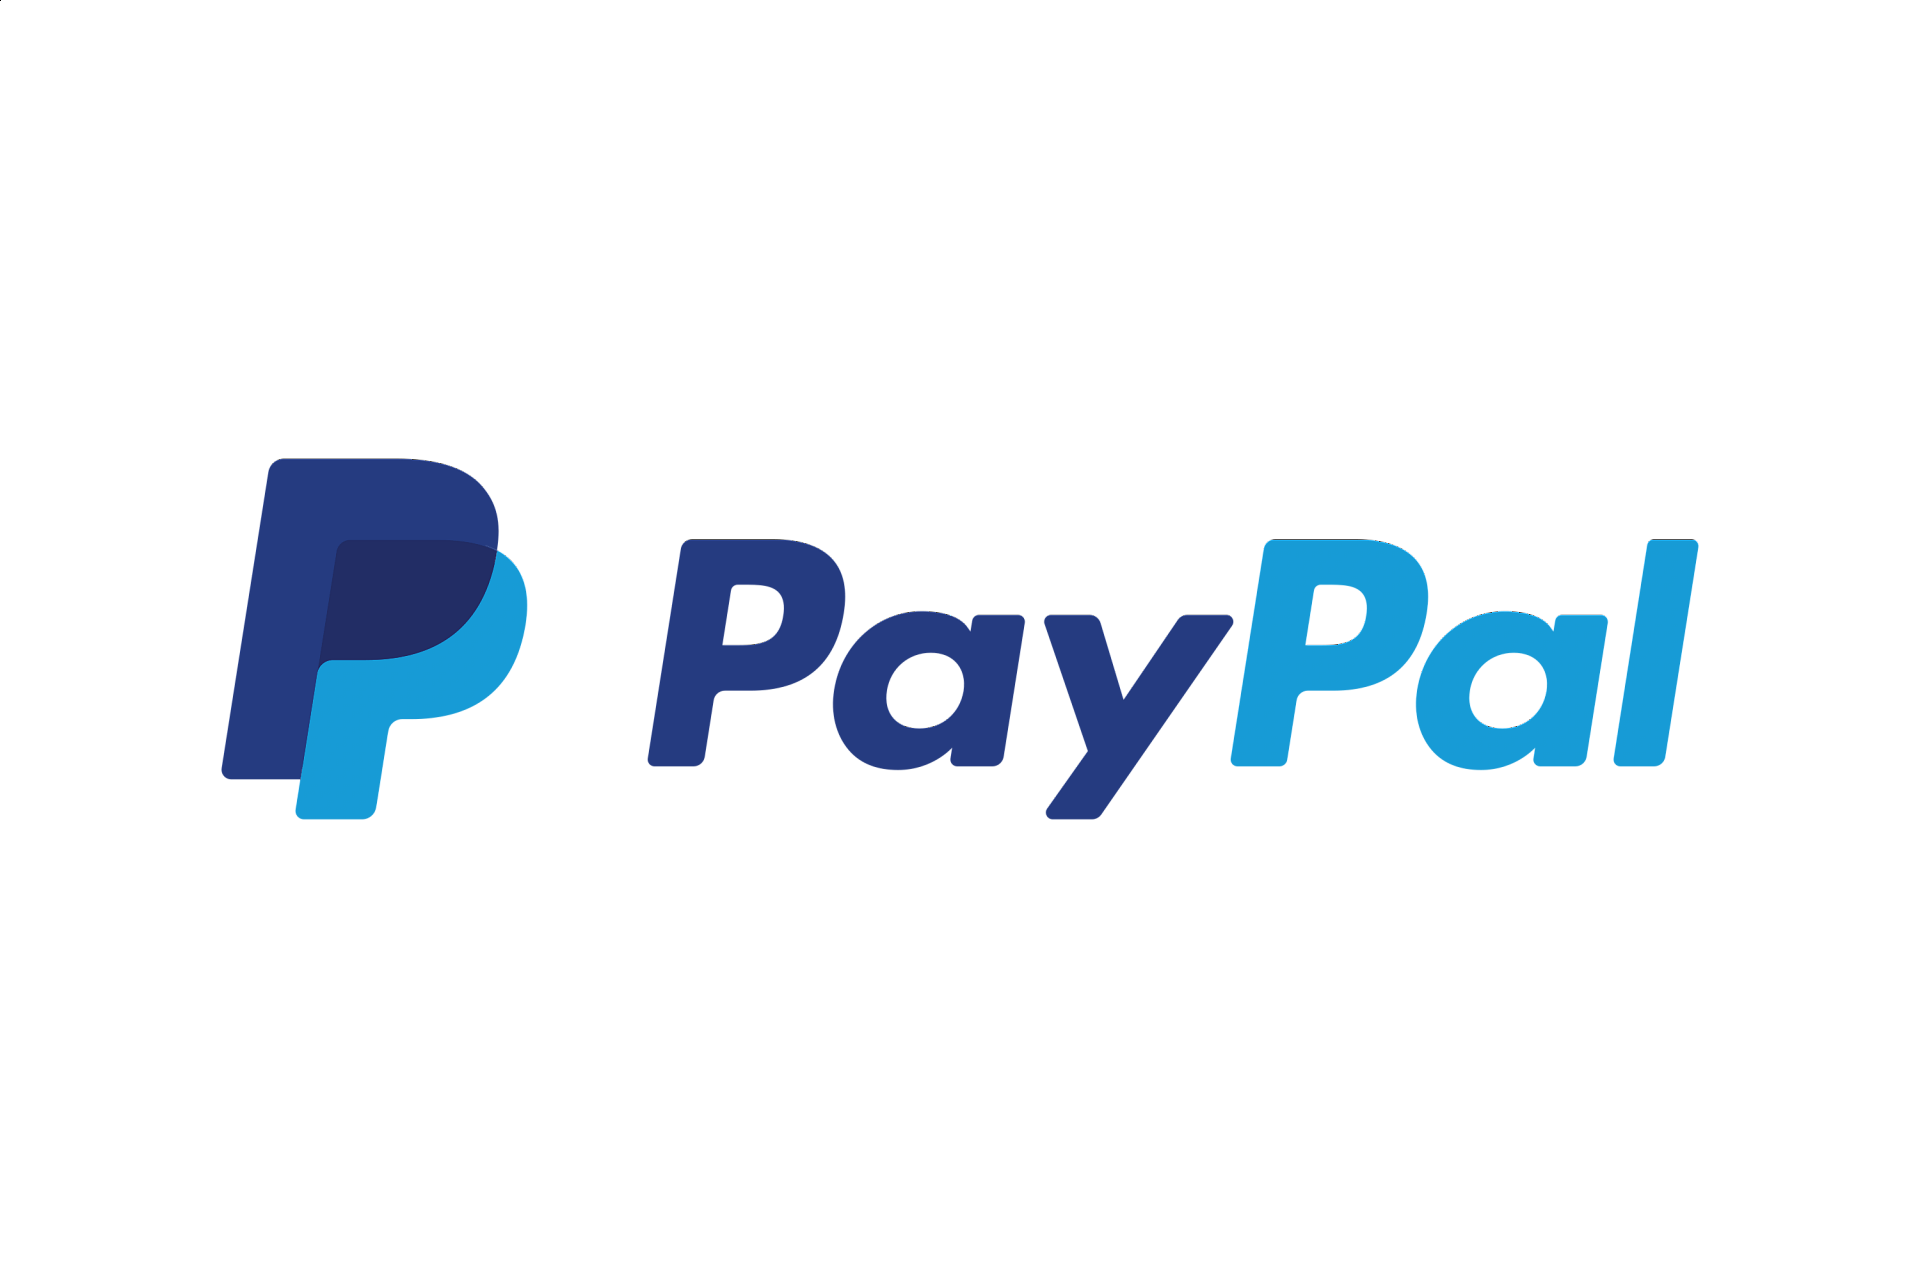 PayPal Logowine